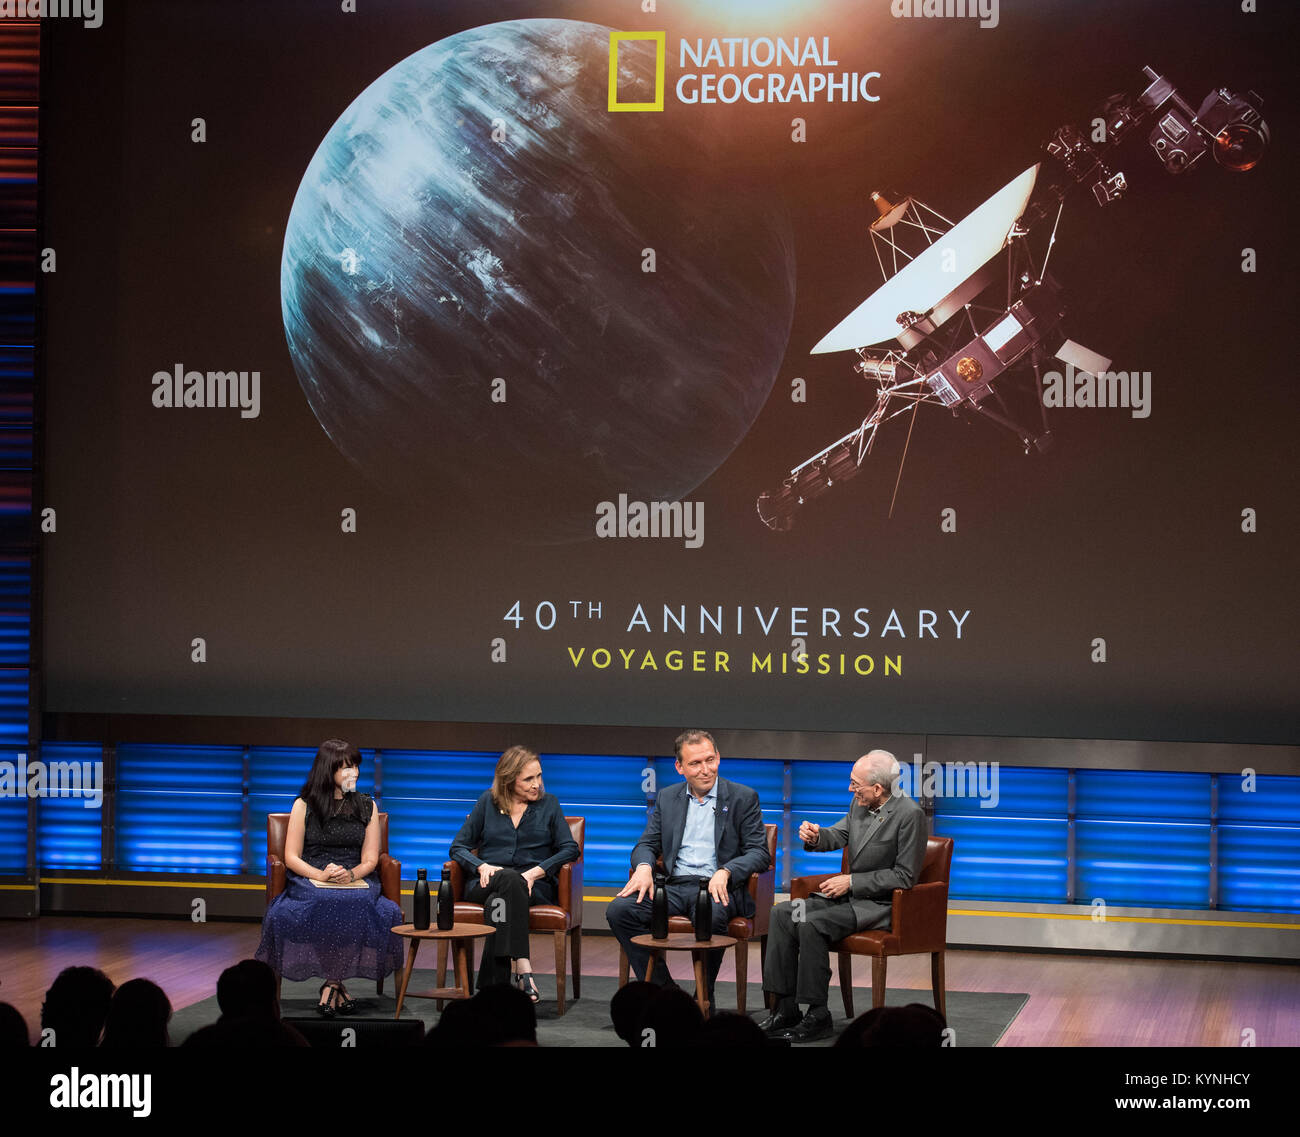 Victoria Jaggard, National Geographic Magazine science editor, left, moderates a panel discussion with, Ann Druyan, writer/producer and golden record visionary, second from left; Thomas Zurbuchen, associate administrator for NASA's Science Mission Directorate, second from right; and Ed Stone, Voyager project scientist, right, at an event to celebrate the 40th Anniversary of the launch of the Voyager 1 and 2 missions, Tuesday, September 5, 2017 at National Geographic Society Headquarters in Washington. Voyager 1 was launched September 5, 1977, with a mission to study Jupiter and Saturn, but now Stock Photo